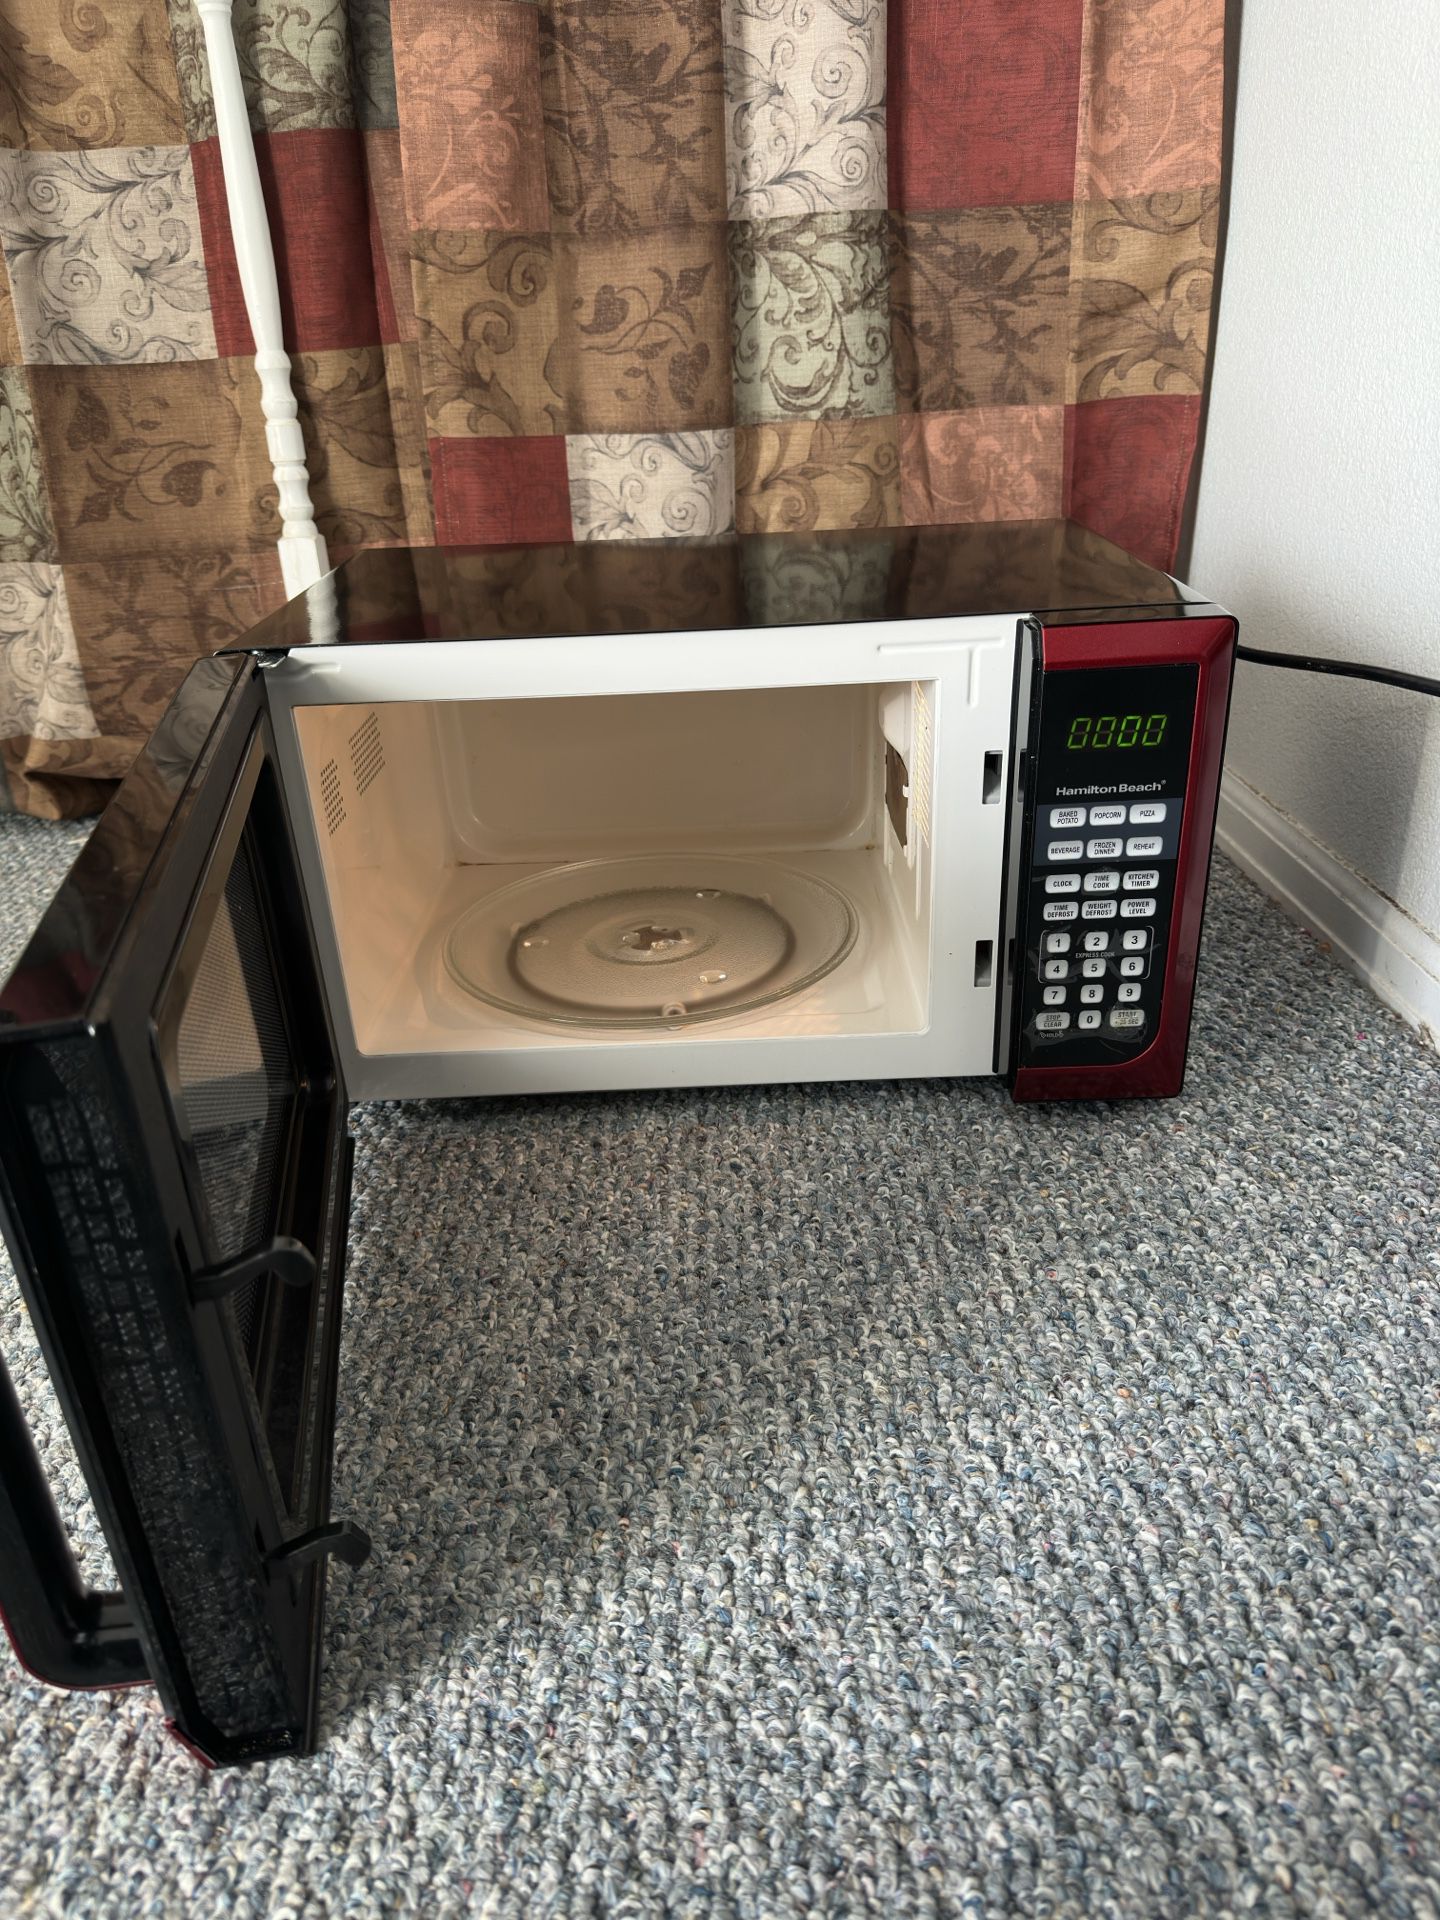 Red Microwave